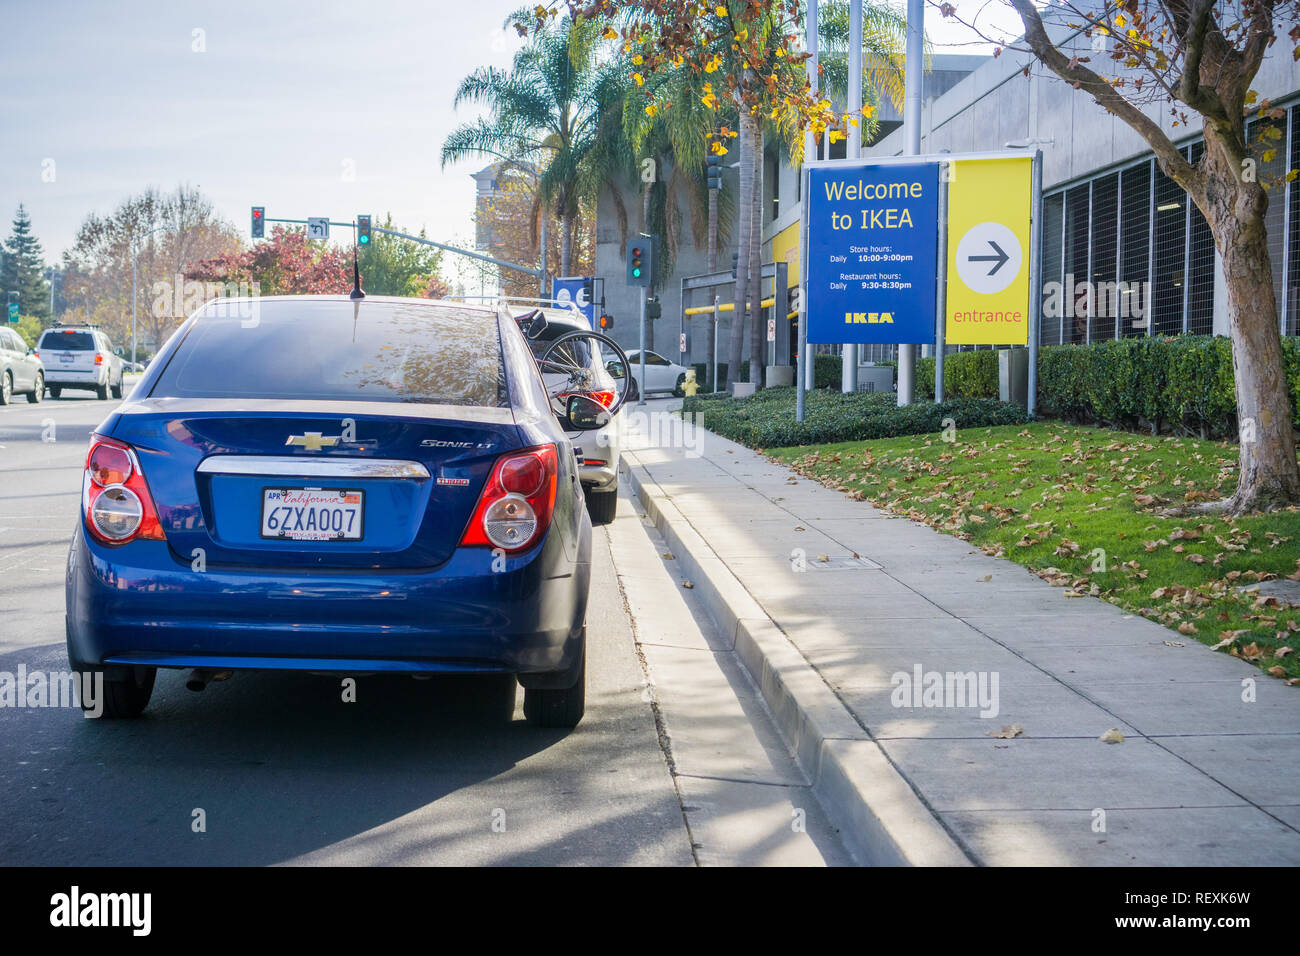 December 9, 2017 East Palo Alto / CA / USA - Cars waiting in line to enter the IKEA parking lot; Welcome to IKEA sign and store hours displayed at the Stock Photo